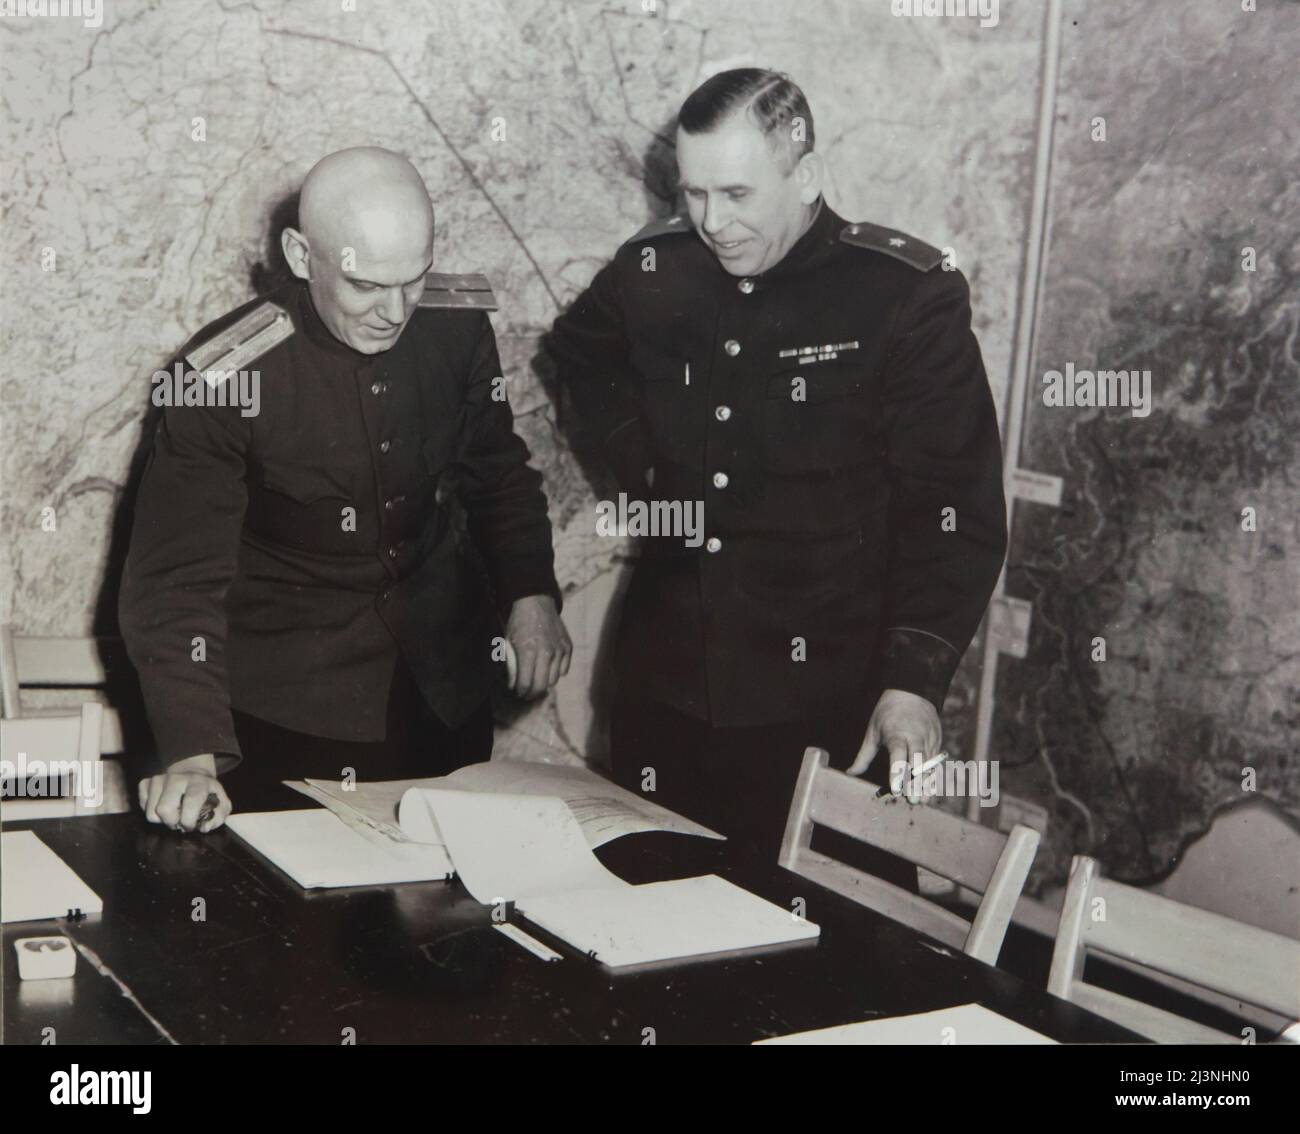 Soviet general Ivan Susloparov (also spelled as Ivan Sousloparov) and his interpreter Ivan Cherniaev (at the left) pictured in the Map Room also known as the War Room of the Supreme Headquarters Allied Expeditionary Force (SHAEF) in the Museum of the Surrender (Musée de la Reddition) in Reims, France, on 6 May 1945. The first German Instrument of Surrender that ended World War II in Europe was signed on this table in this room at 02:41 Central European Time (CET) on 7 May 1945. The historical room is served now as a part of the Museum of the Surrender (Musée de la Reddition). The black and whi Stock Photo